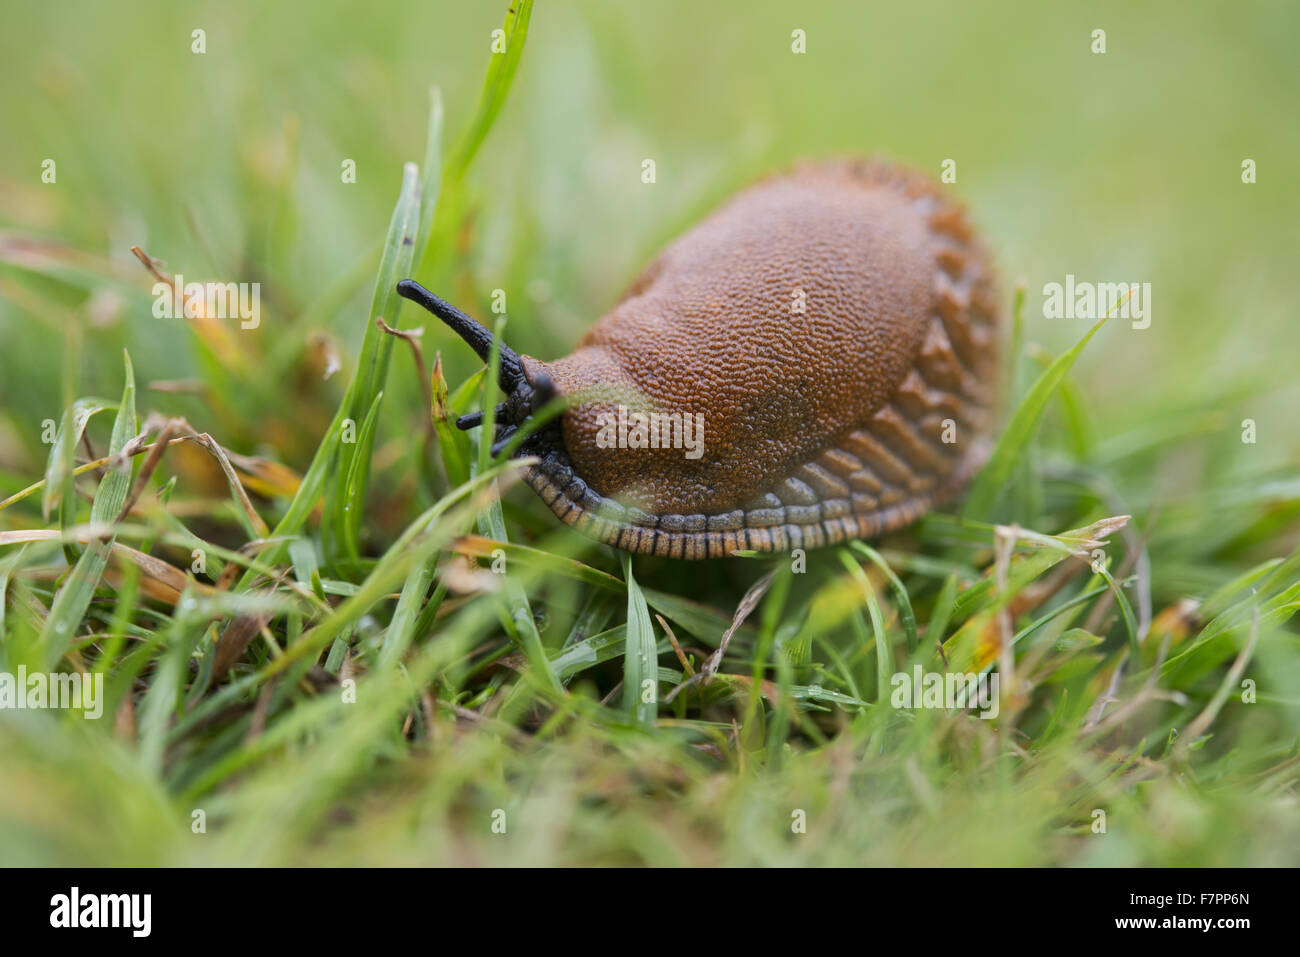 A great red slug (Arion ater) on the grass at Morden Hall Park, London. Stock Photo